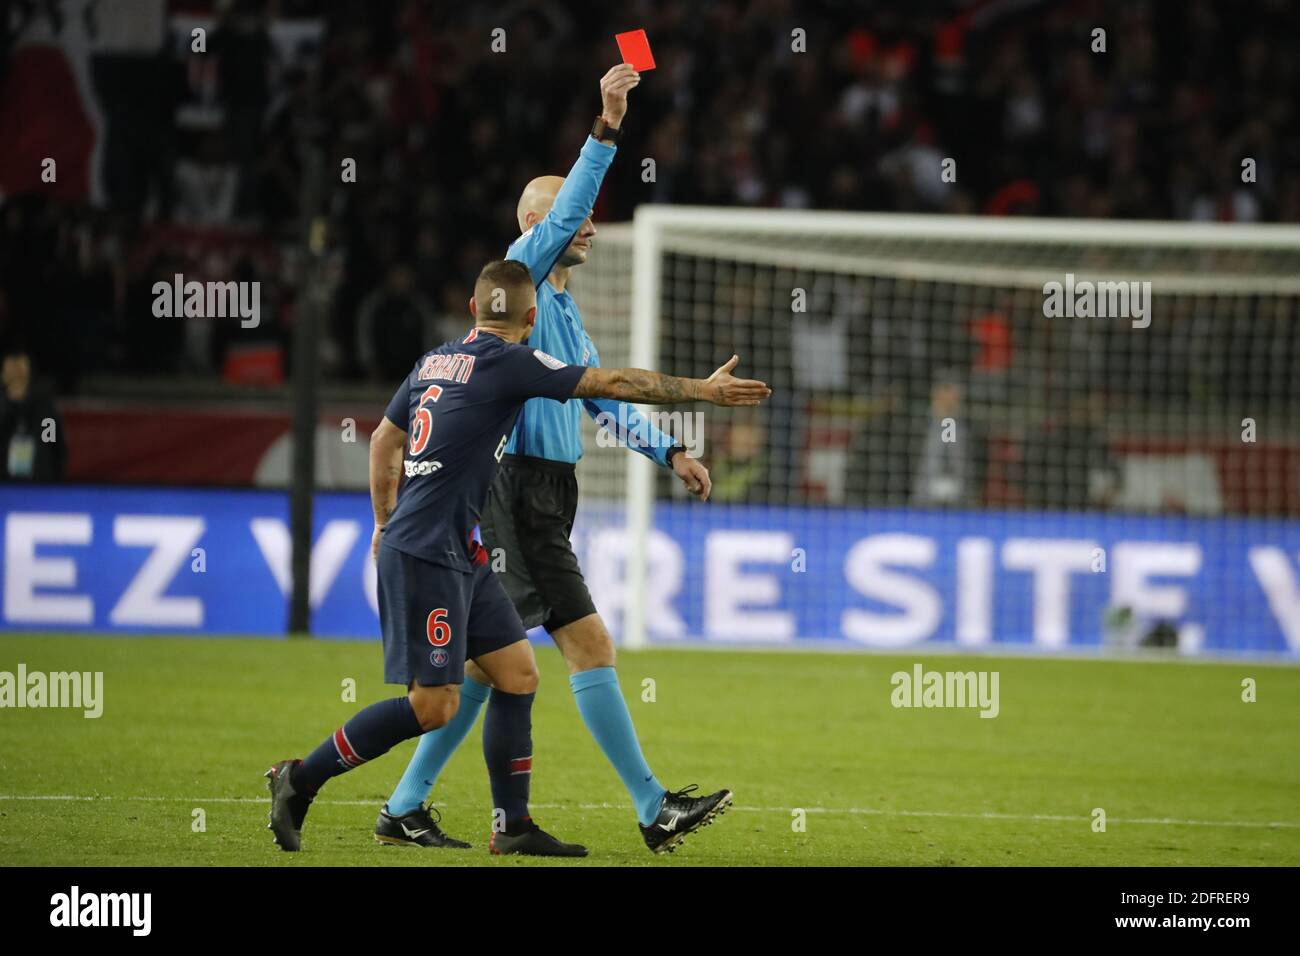 PSG's Fresnel Kimpembe receiving a red card from referee Abthony Gautier during the Ligue 1 Paris St-Germain (PSG) v Olympique Lyonnais football match at the Parc des Princes stadium in Paris, France on October 7, 2018. Paris Saint-Germain moved eight points clear at the top of Ligue 1 as Kylian Mbappe scored four goals in a 5-0 victory over Lyon. Photo by Henri Szwarc/ABACAPRESS.COM Stock Photo